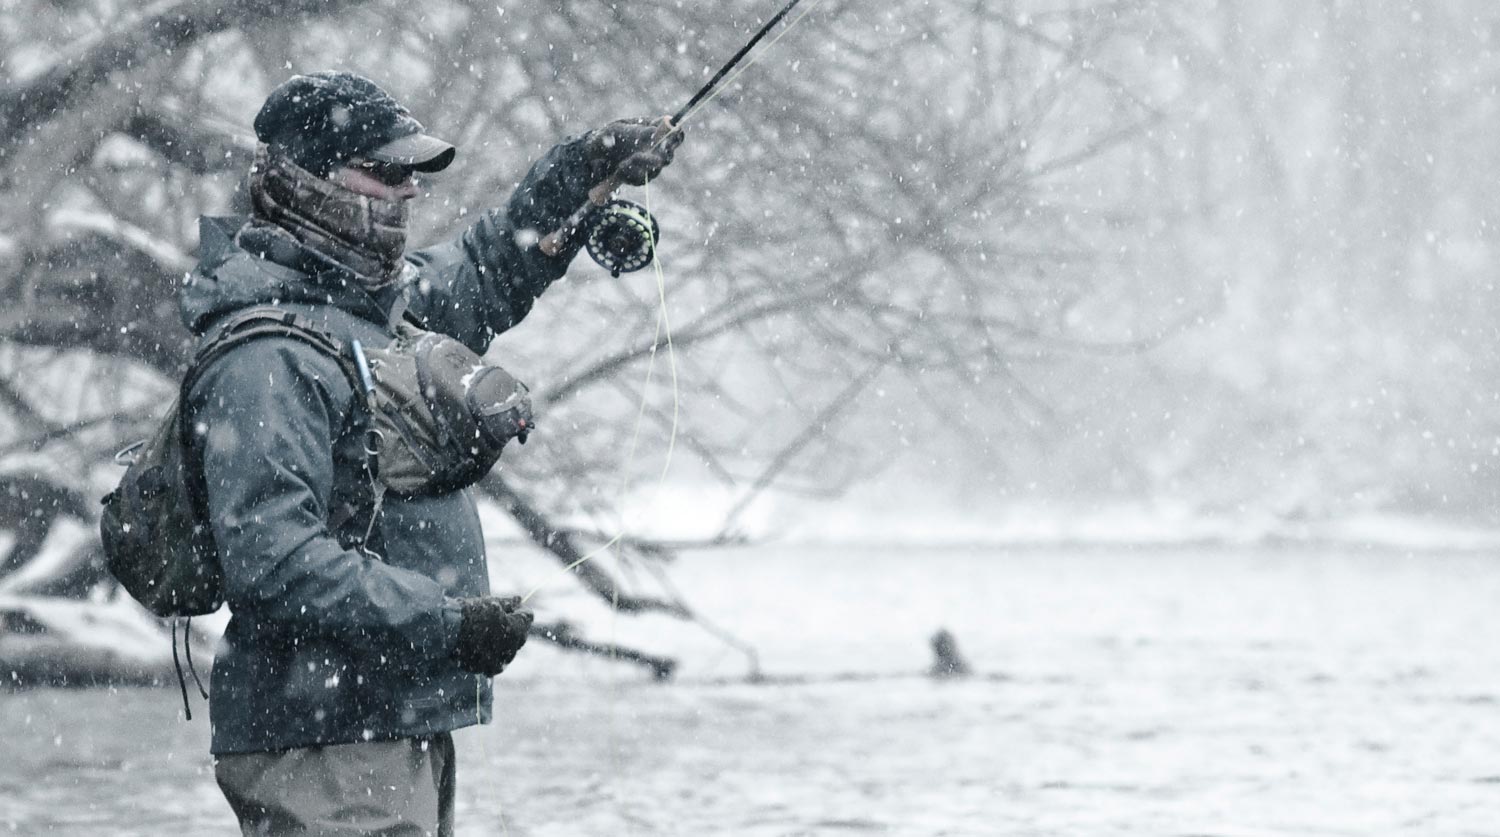 Fly Fishing in Gloves Gets Better with Time - Fly Fishing